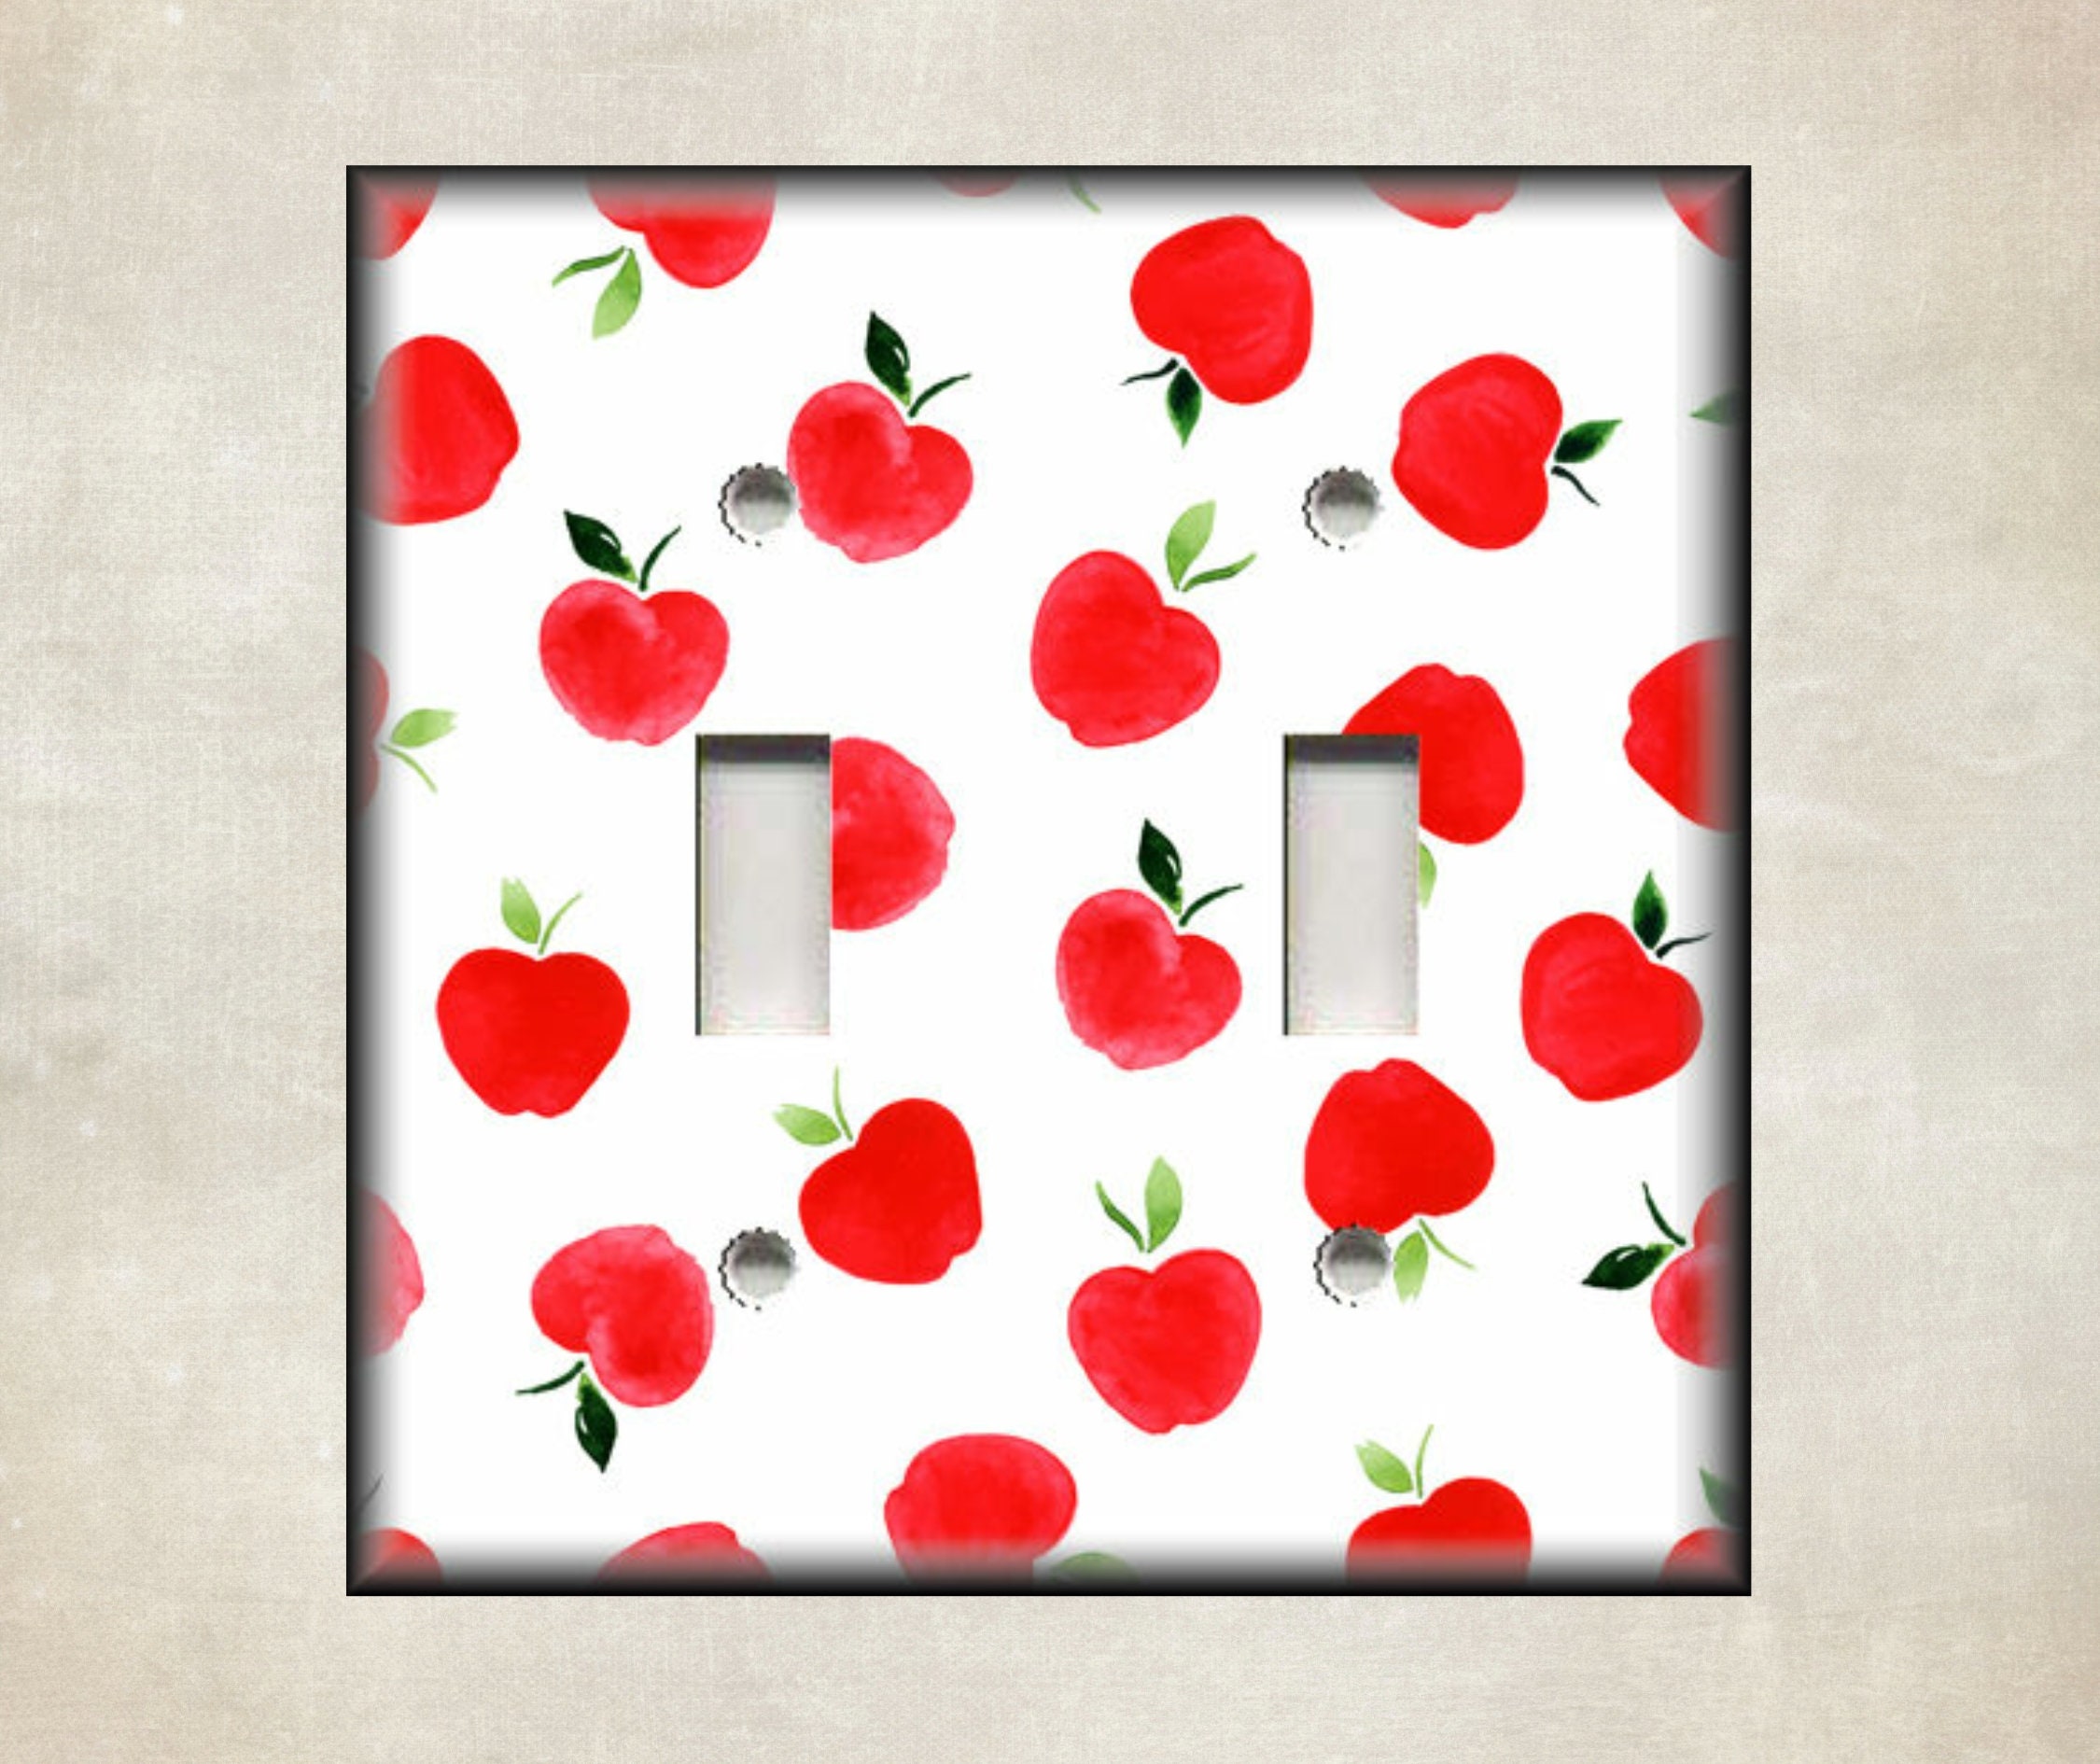 RED APPLES WITH APPLE BLOSSOMS KITCHEN HOME DECOR LIGHT SWITCH PLATES OR OUTLETS 